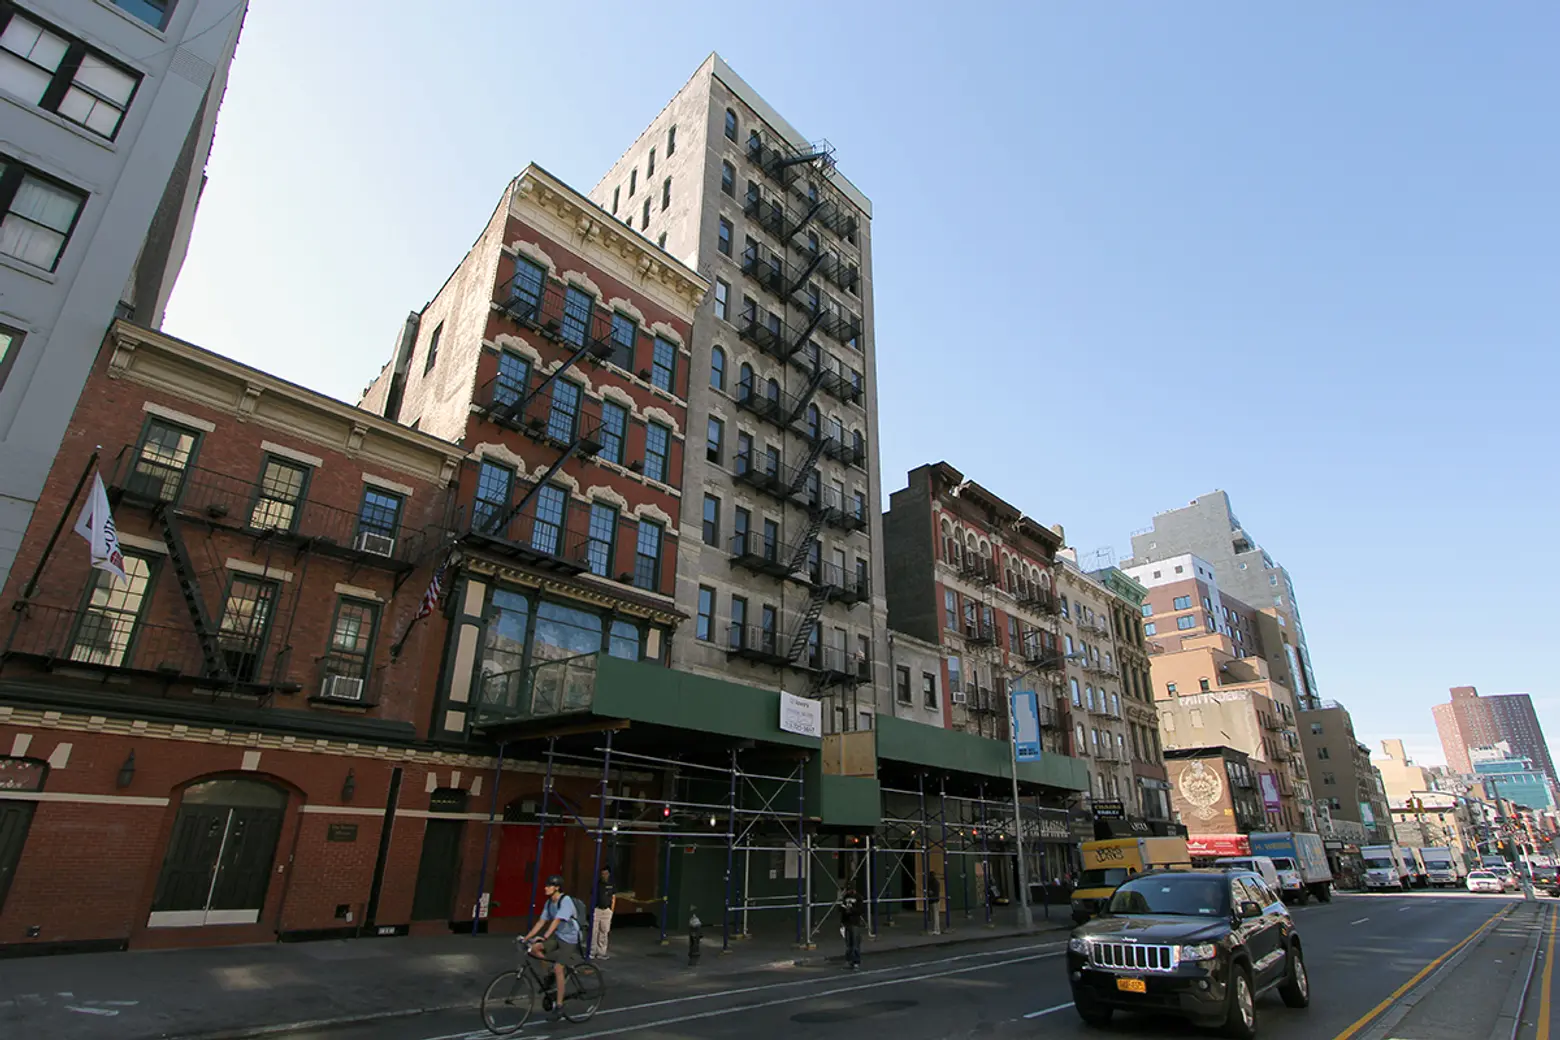 Ace Hotel, HAKS, Salvation Army, North Wind Development Group, Omnia Group, 223-225 Bowery